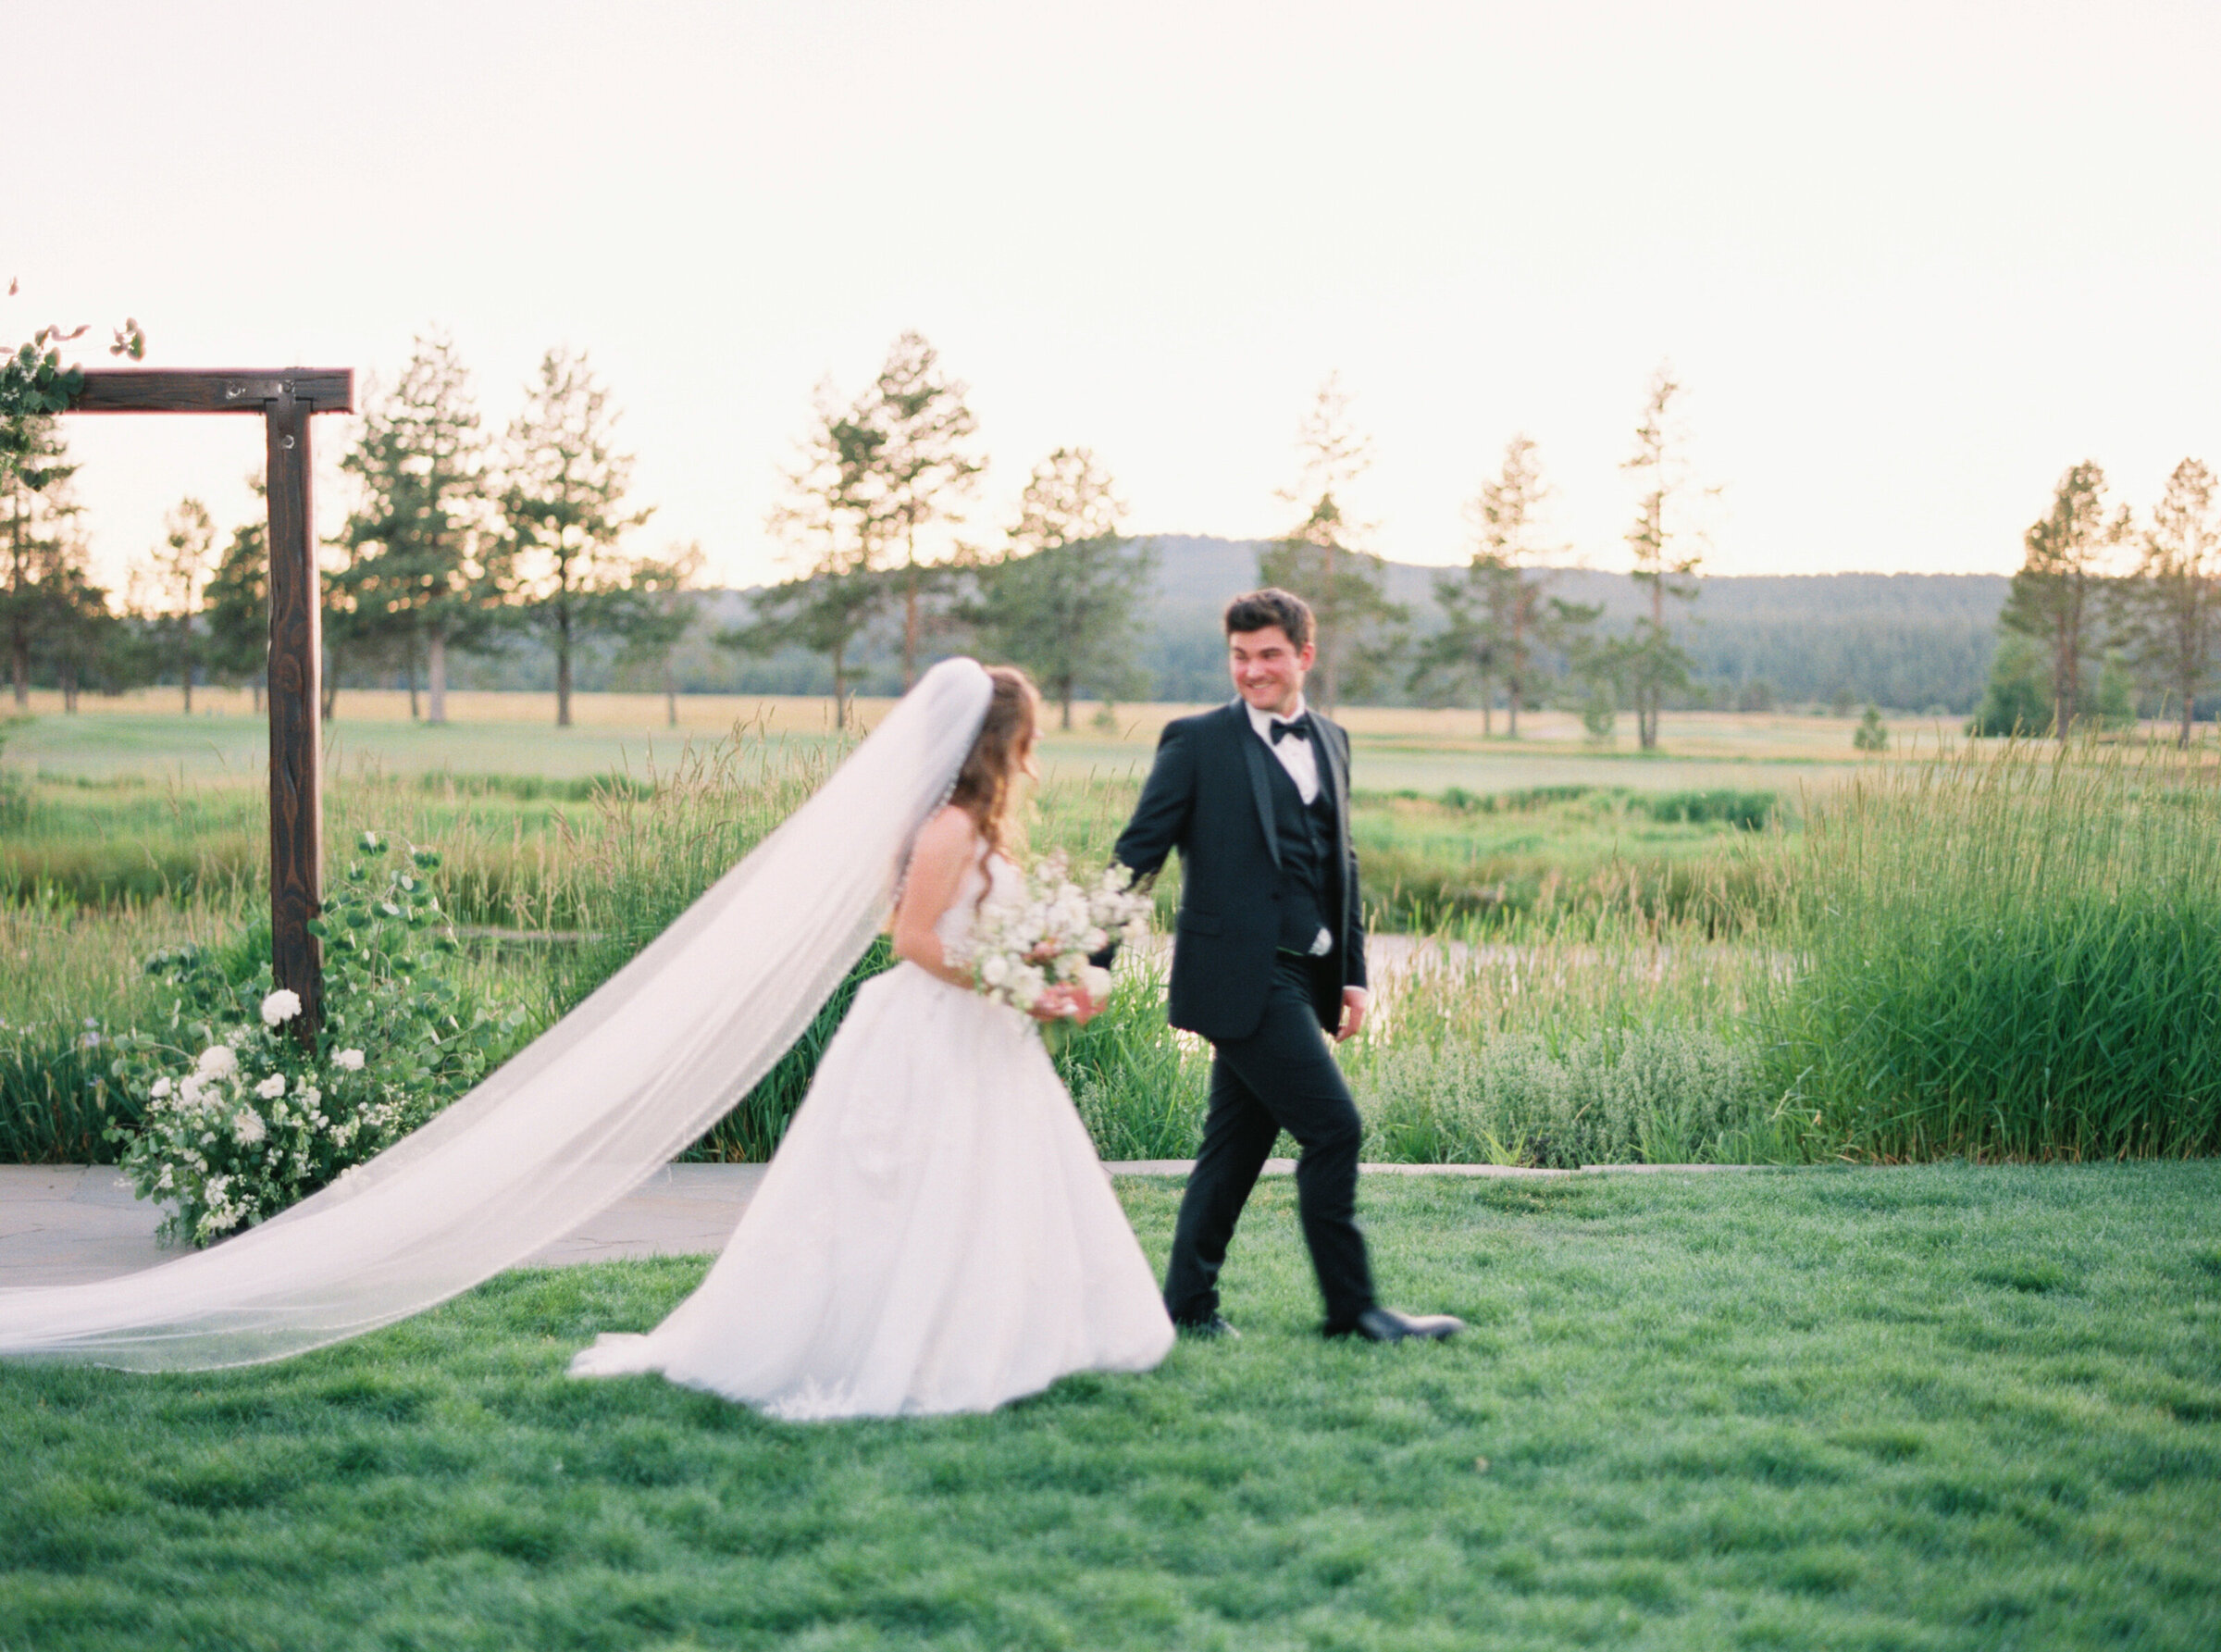 Couple walking  into their wedding reception in Bend, Oregon